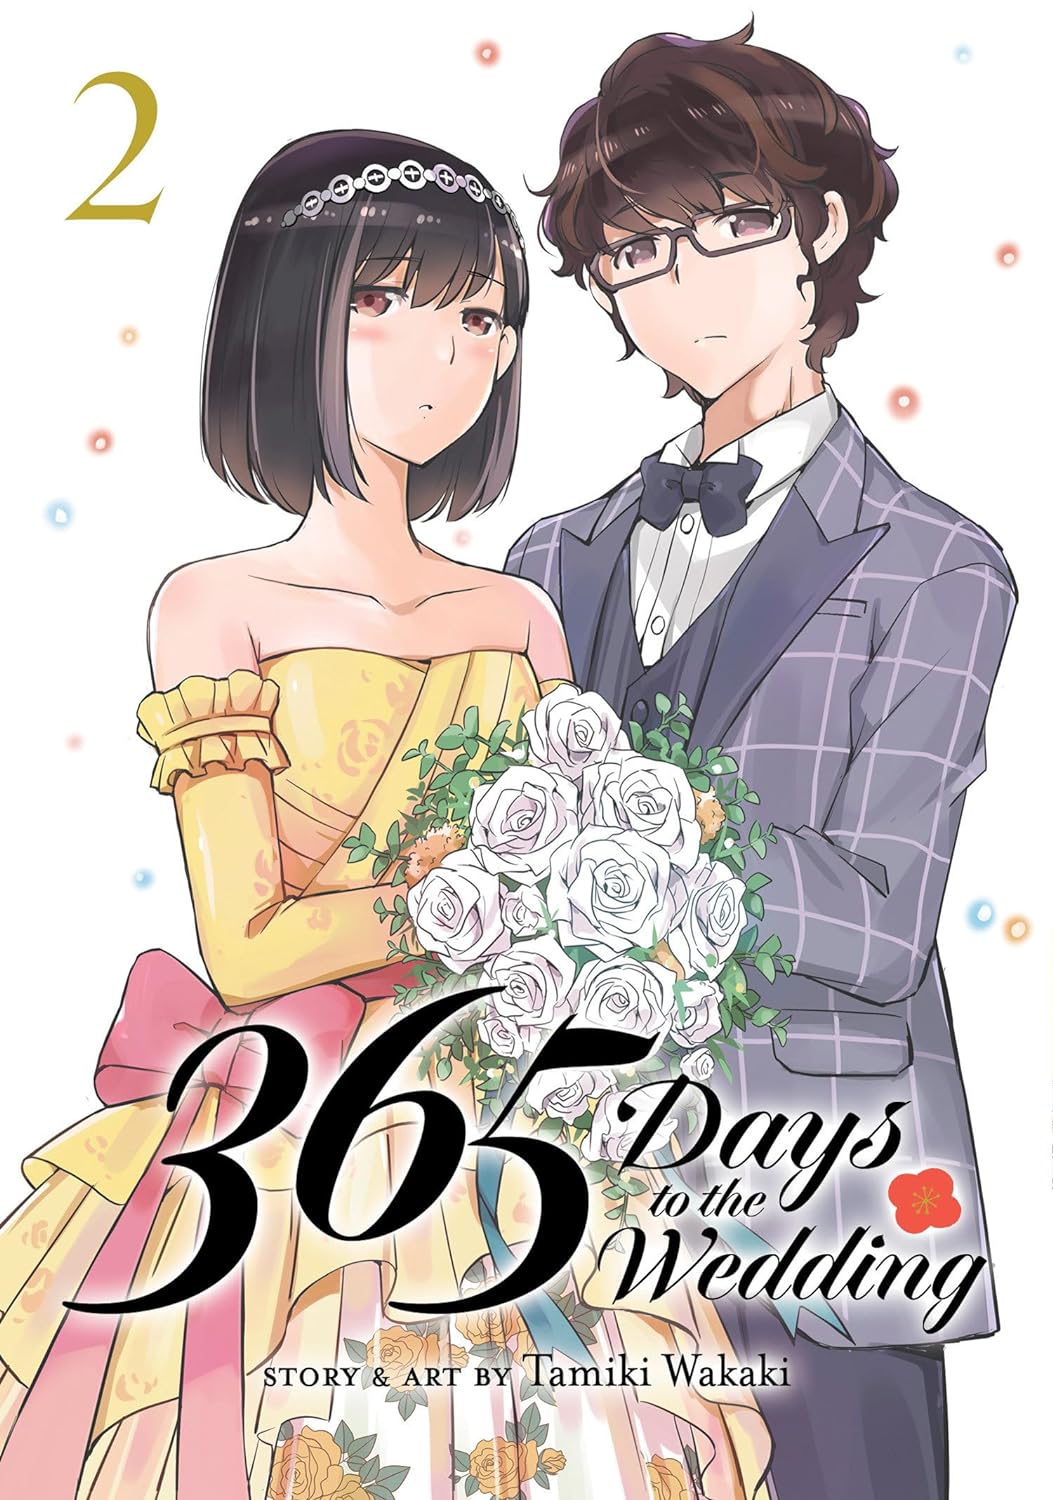 365 Days to the Wedding Vol. 02